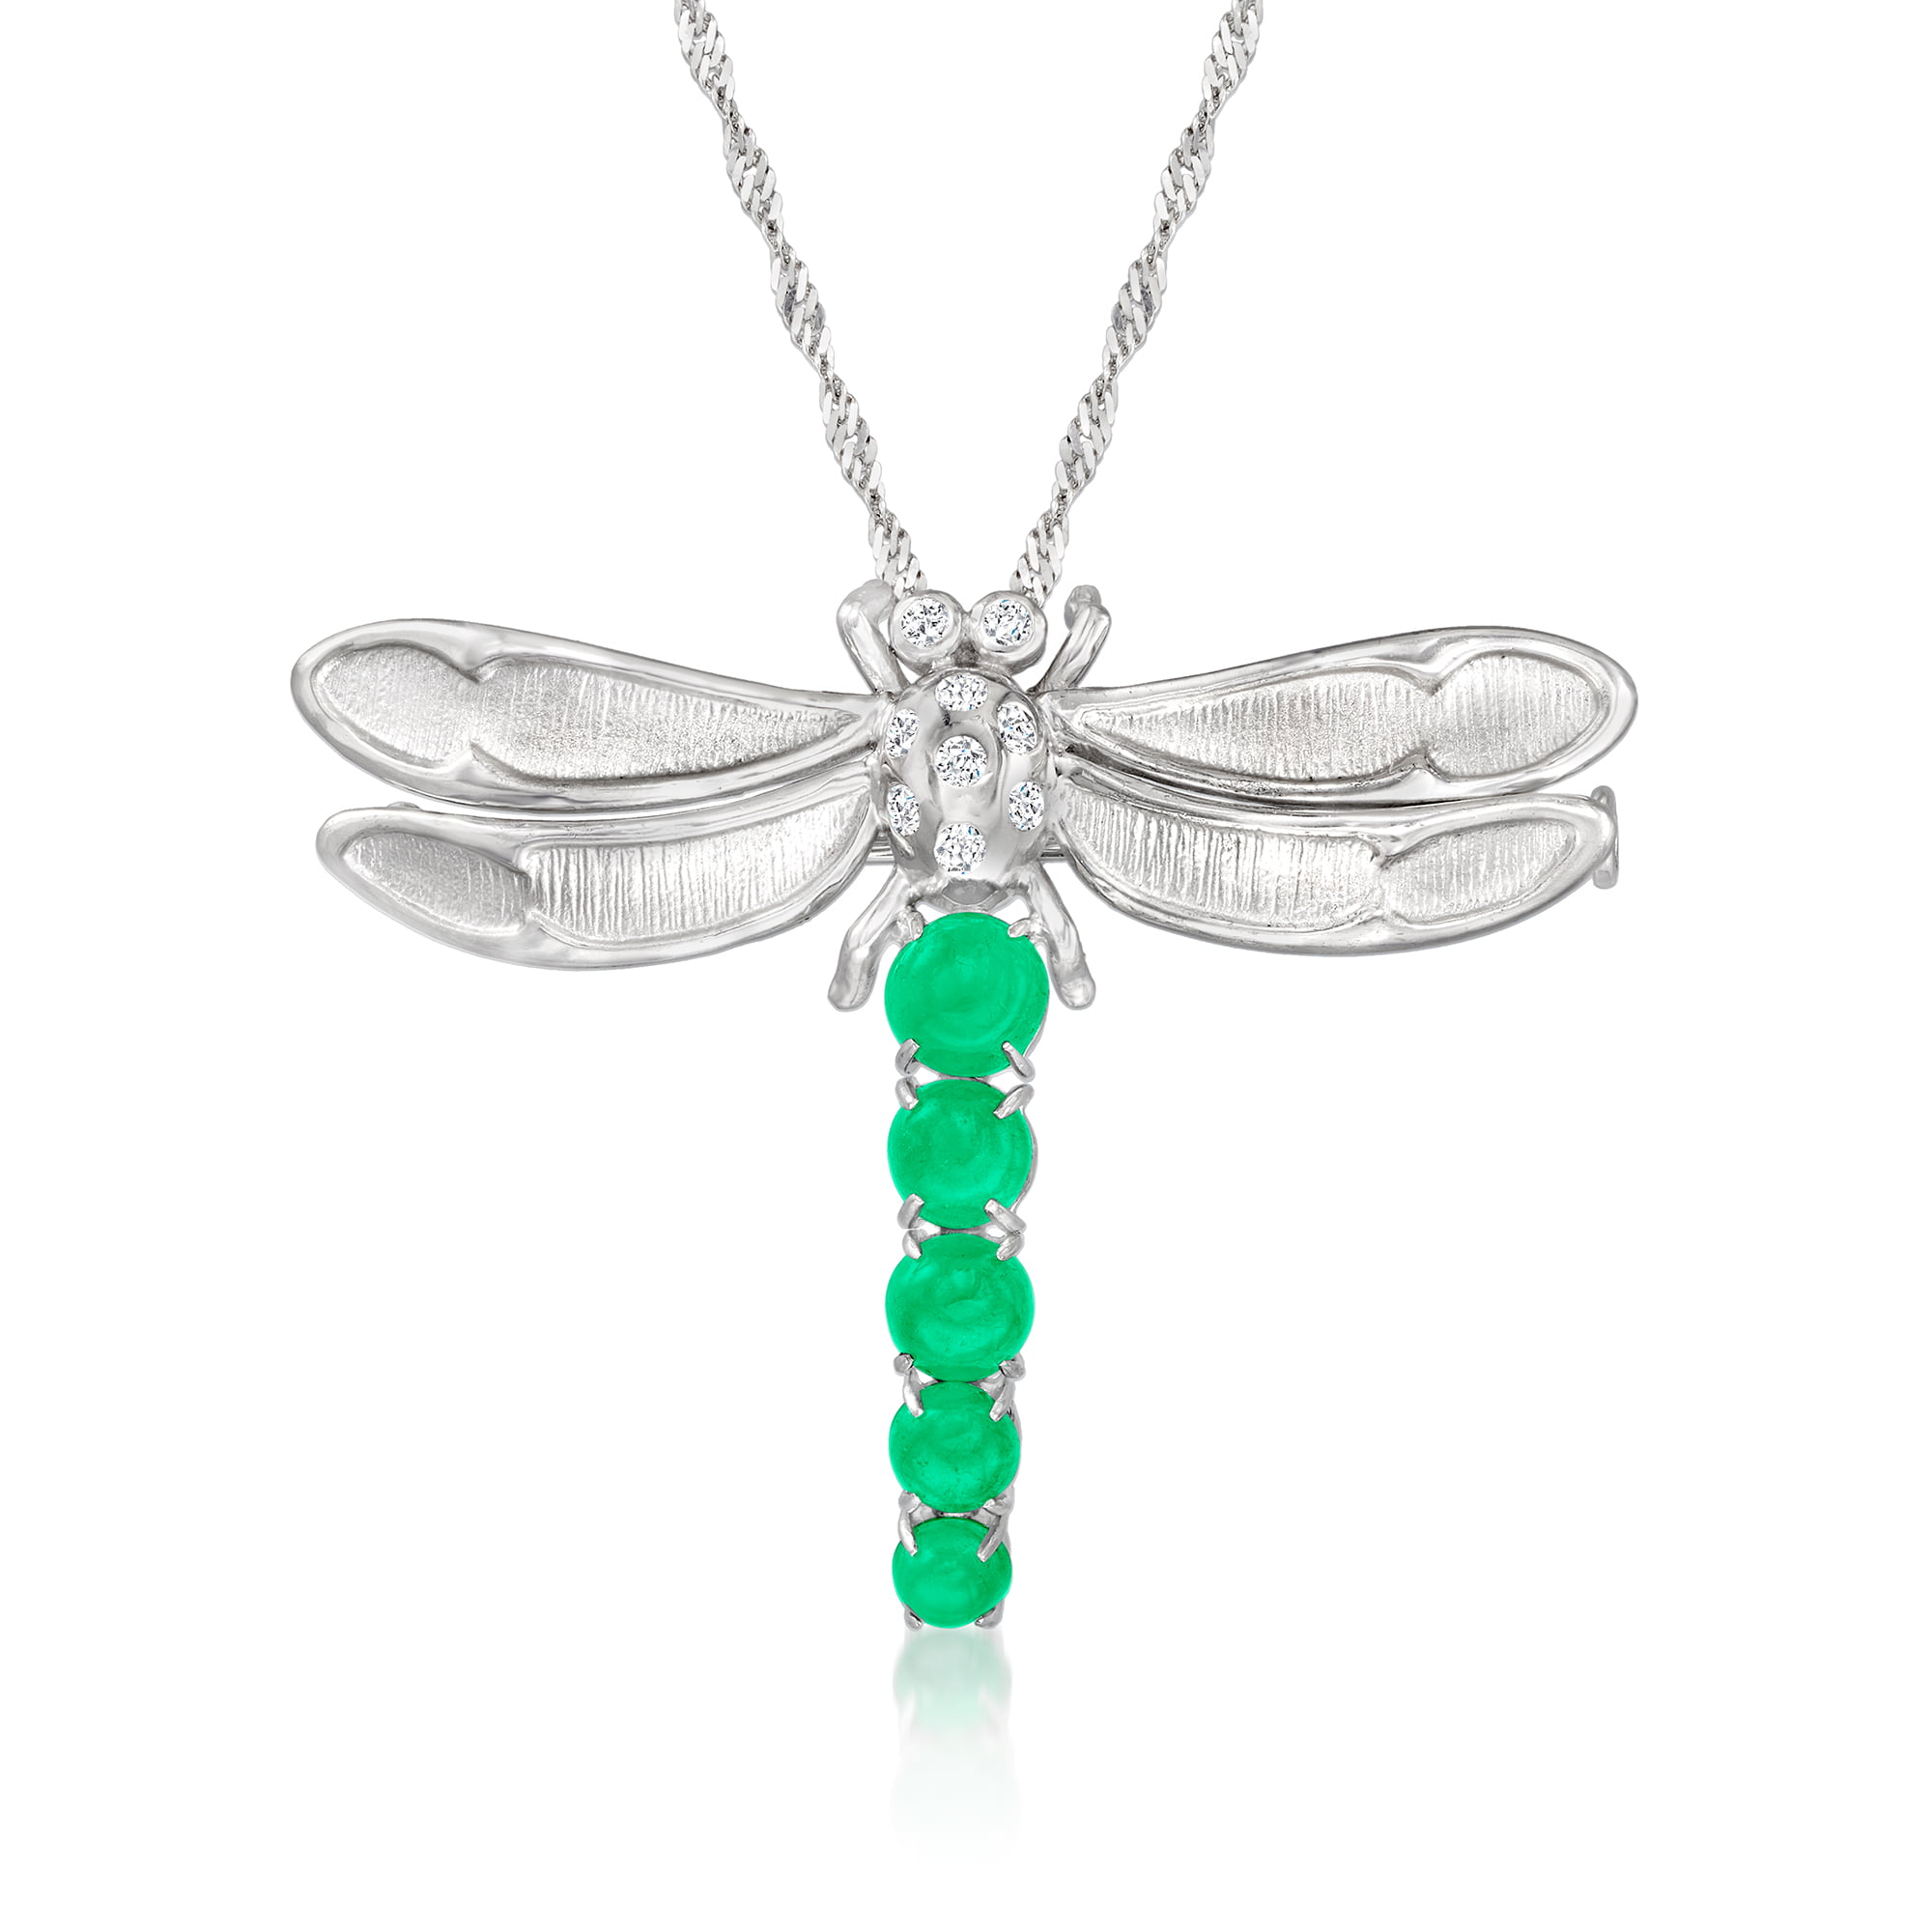 Ross-Simons C. 1980 Vintage  ct. . Emerald Dragonfly Pin/Pendant  Necklace With .19 ct. . Diamonds in 14kt and 18kt White Gold -  